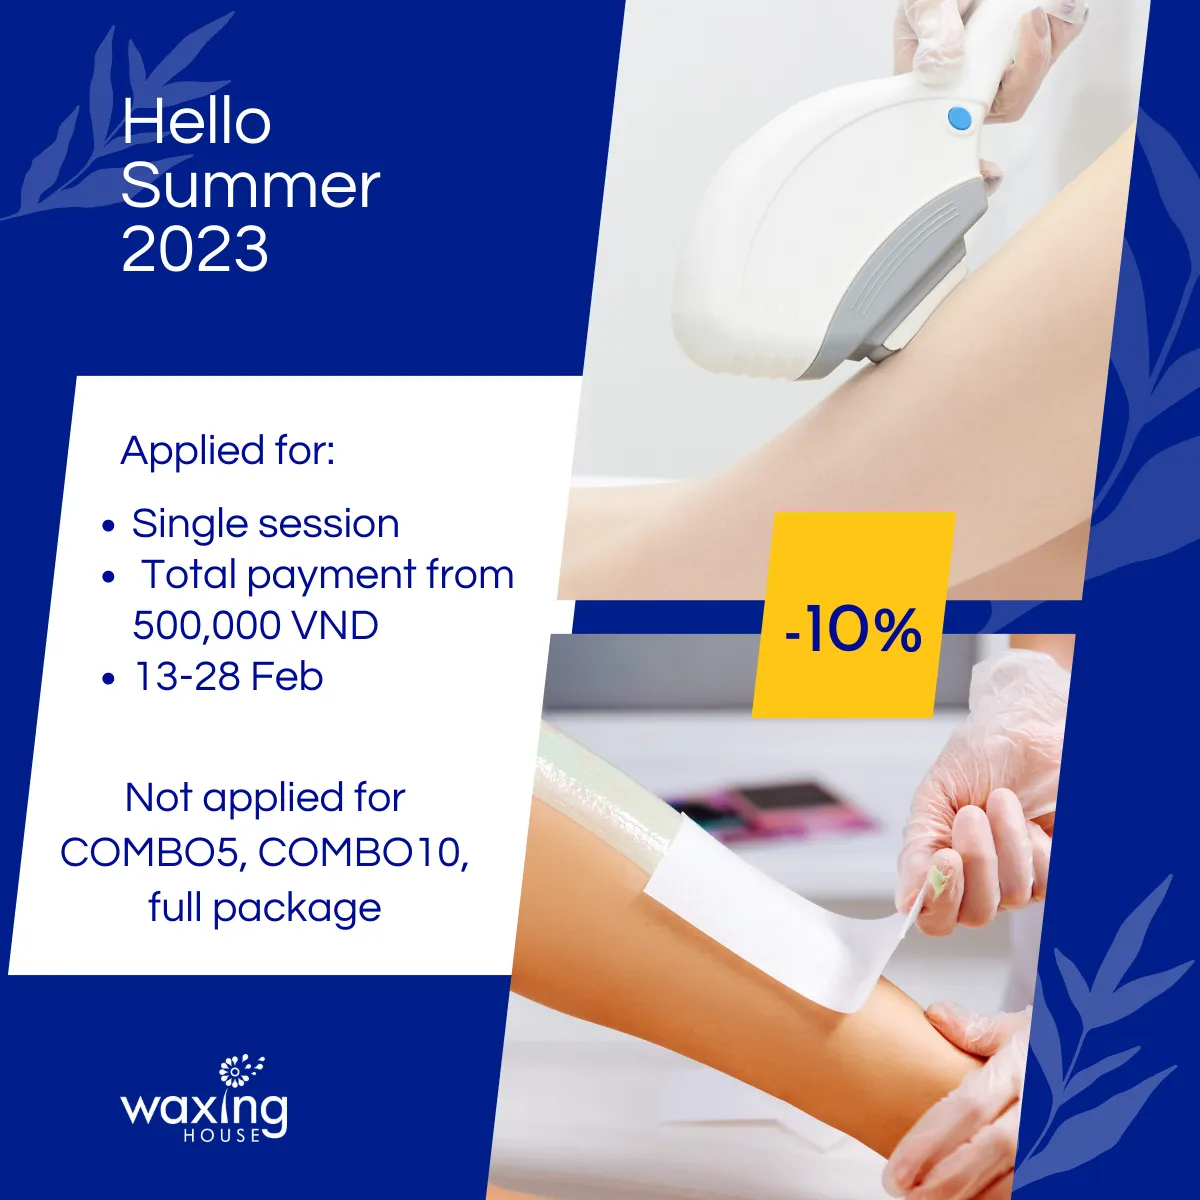 Hot deals for waxing and laser hair removal